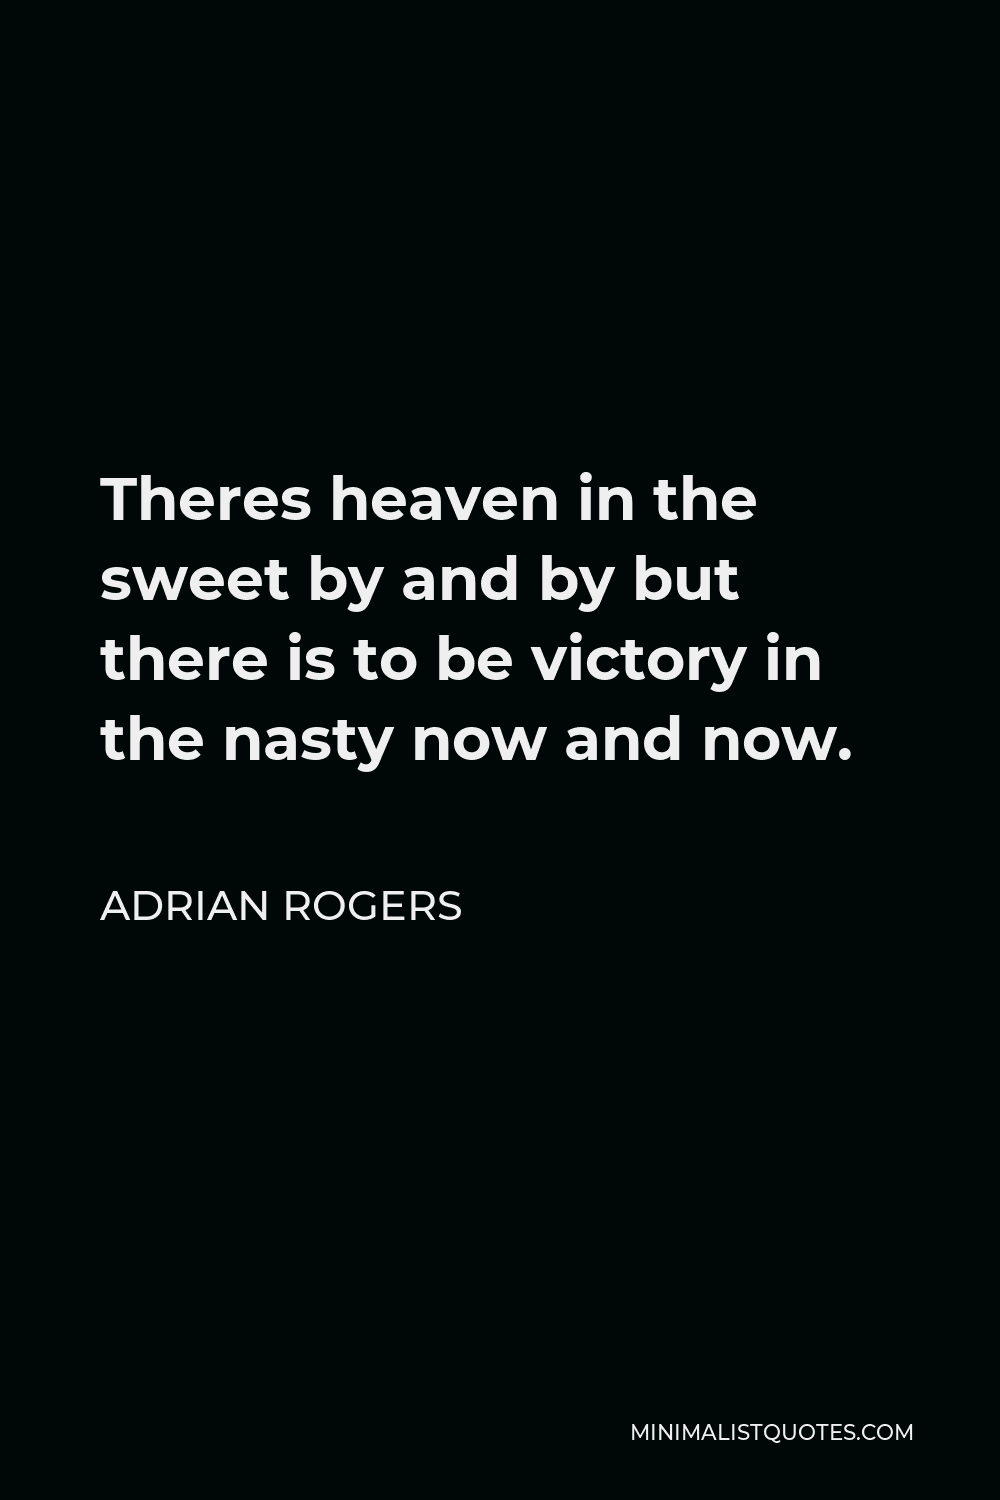 Adrian Rogers Quote - Theres heaven in the sweet by and by but there is to be victory in the nasty now and now.